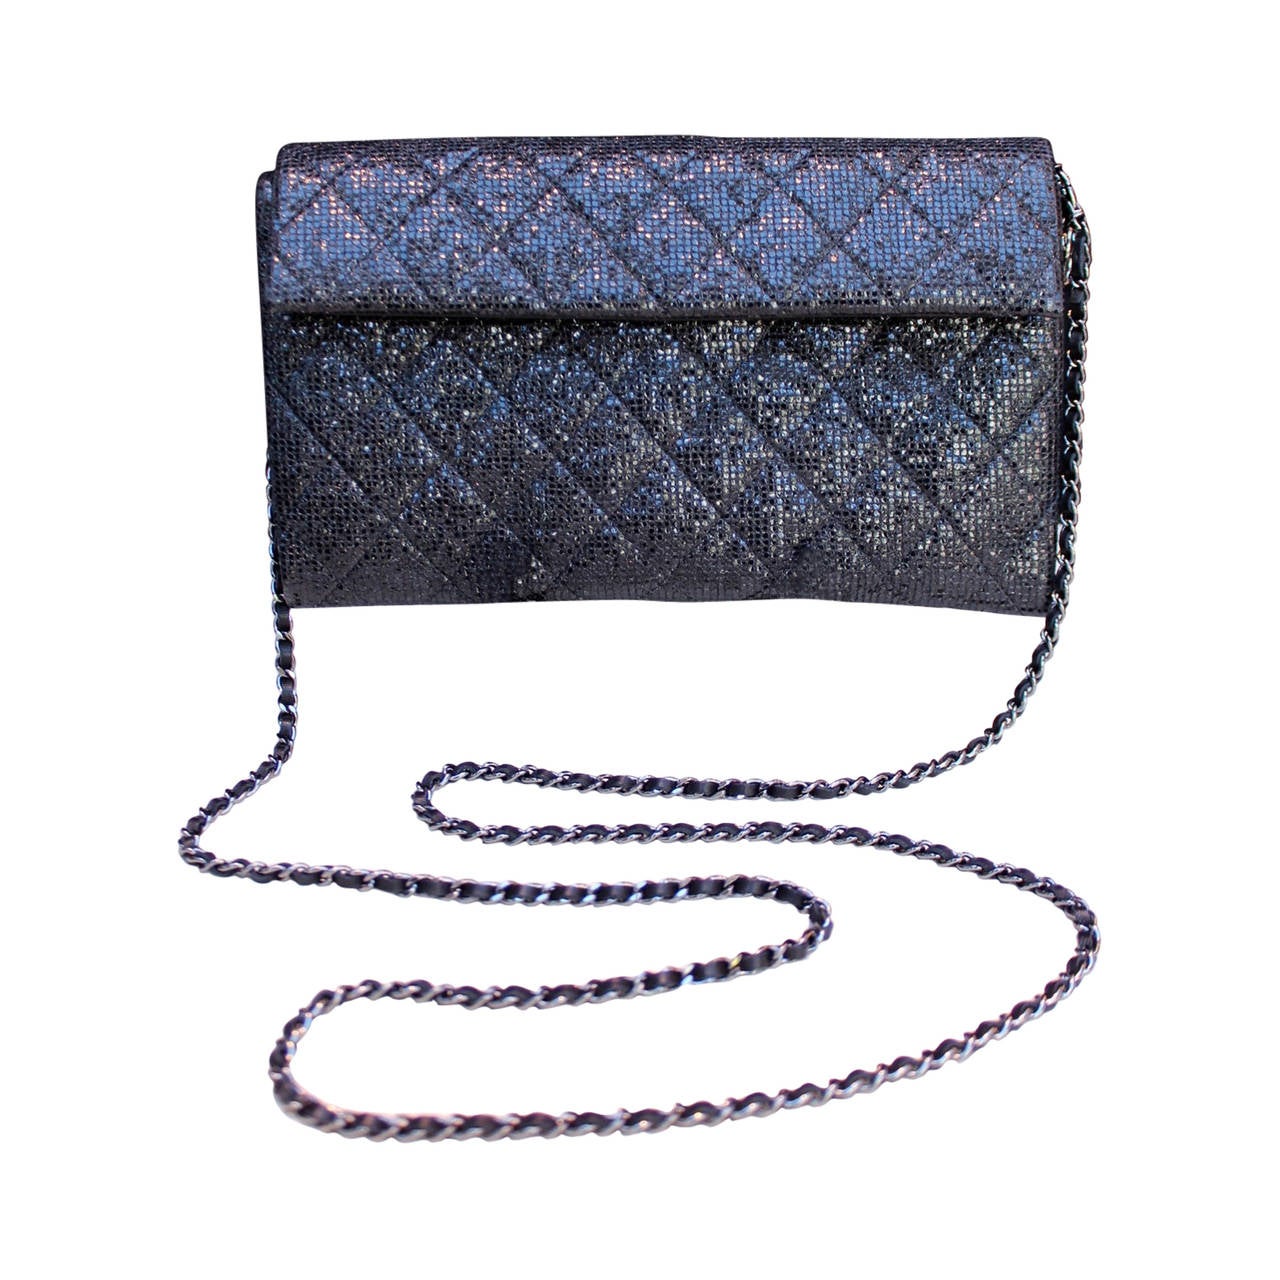 Iridescent Black Evening Bag with Chain by Chanel, December 2014